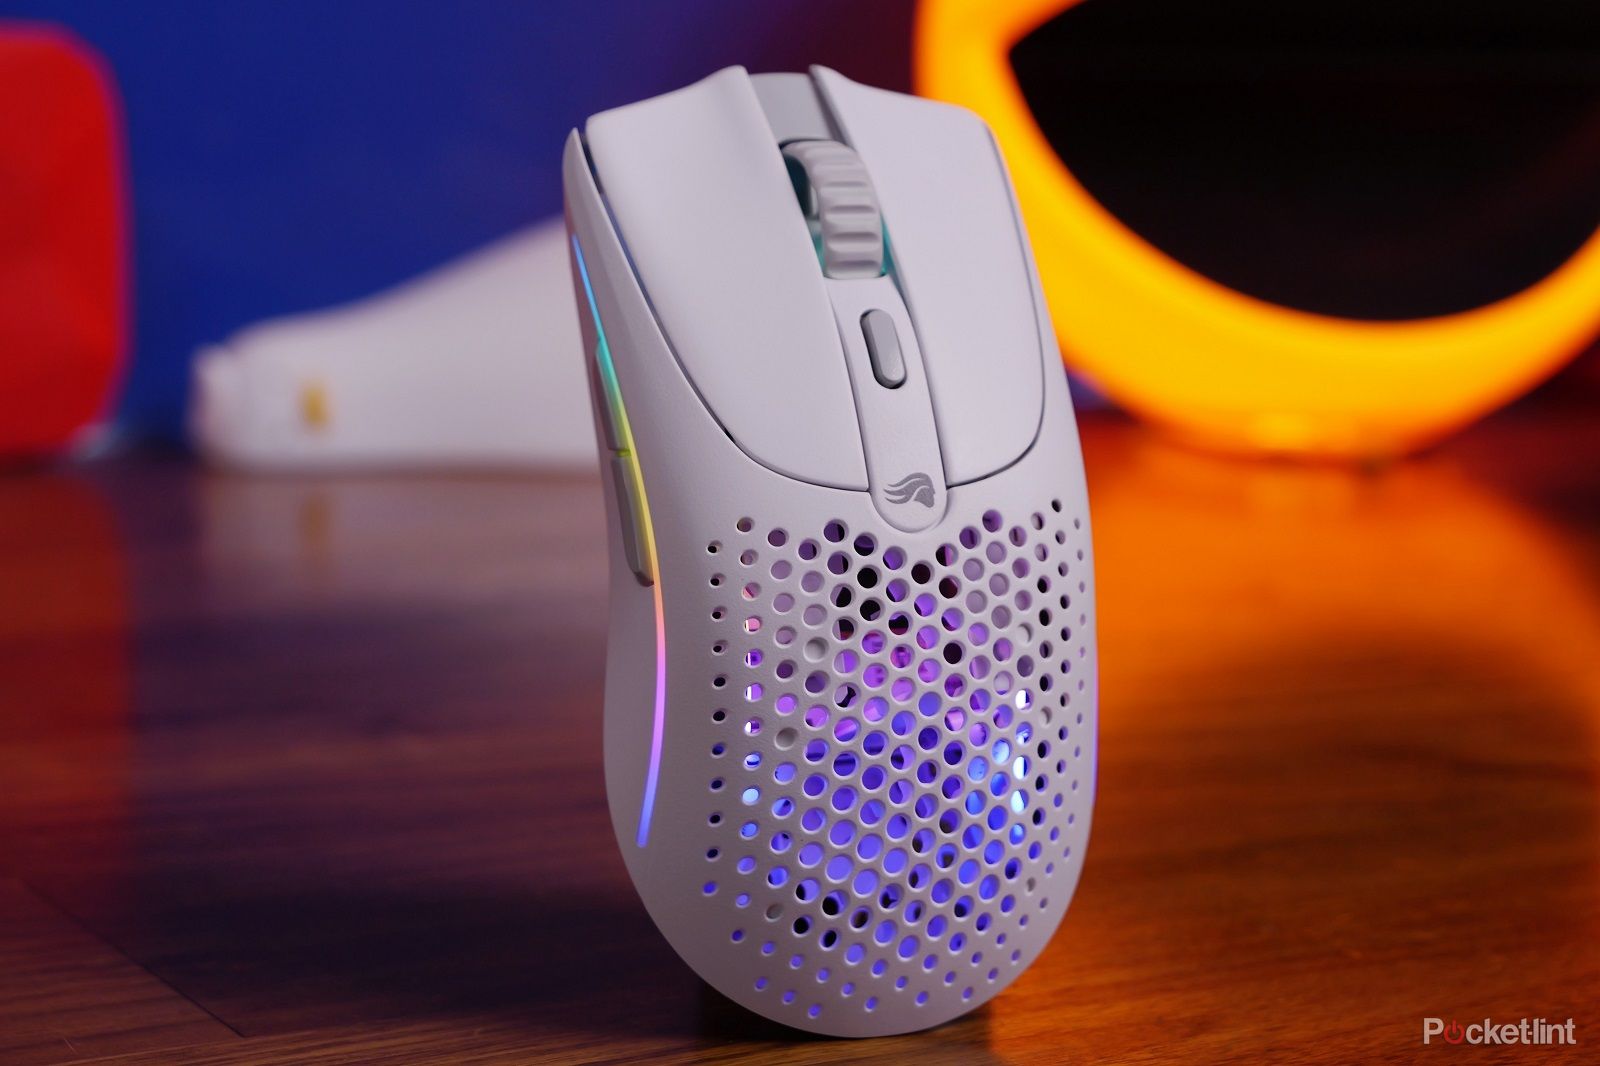 Glorious Model O2 wireless gaming mouse review: Another lightweight gem